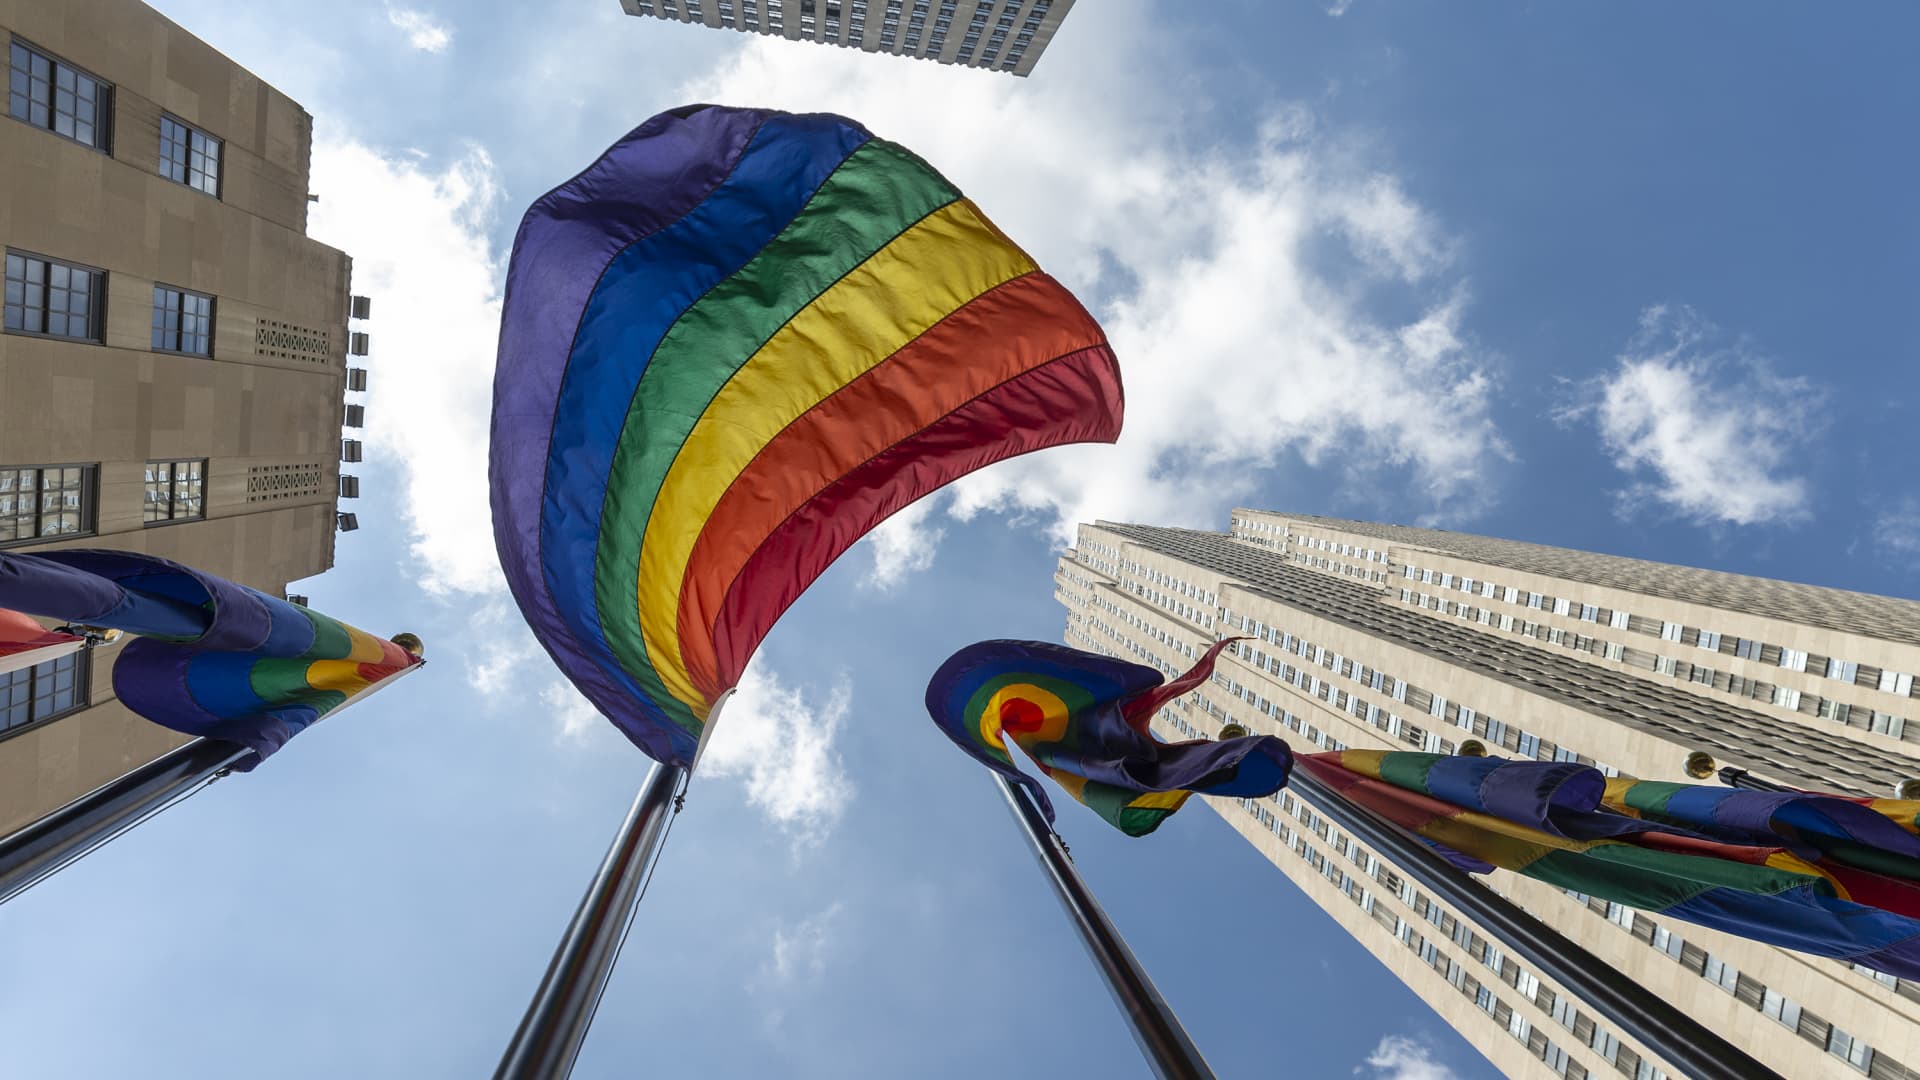 30% of LGBTQ+ adults experienced discrimination in financial services